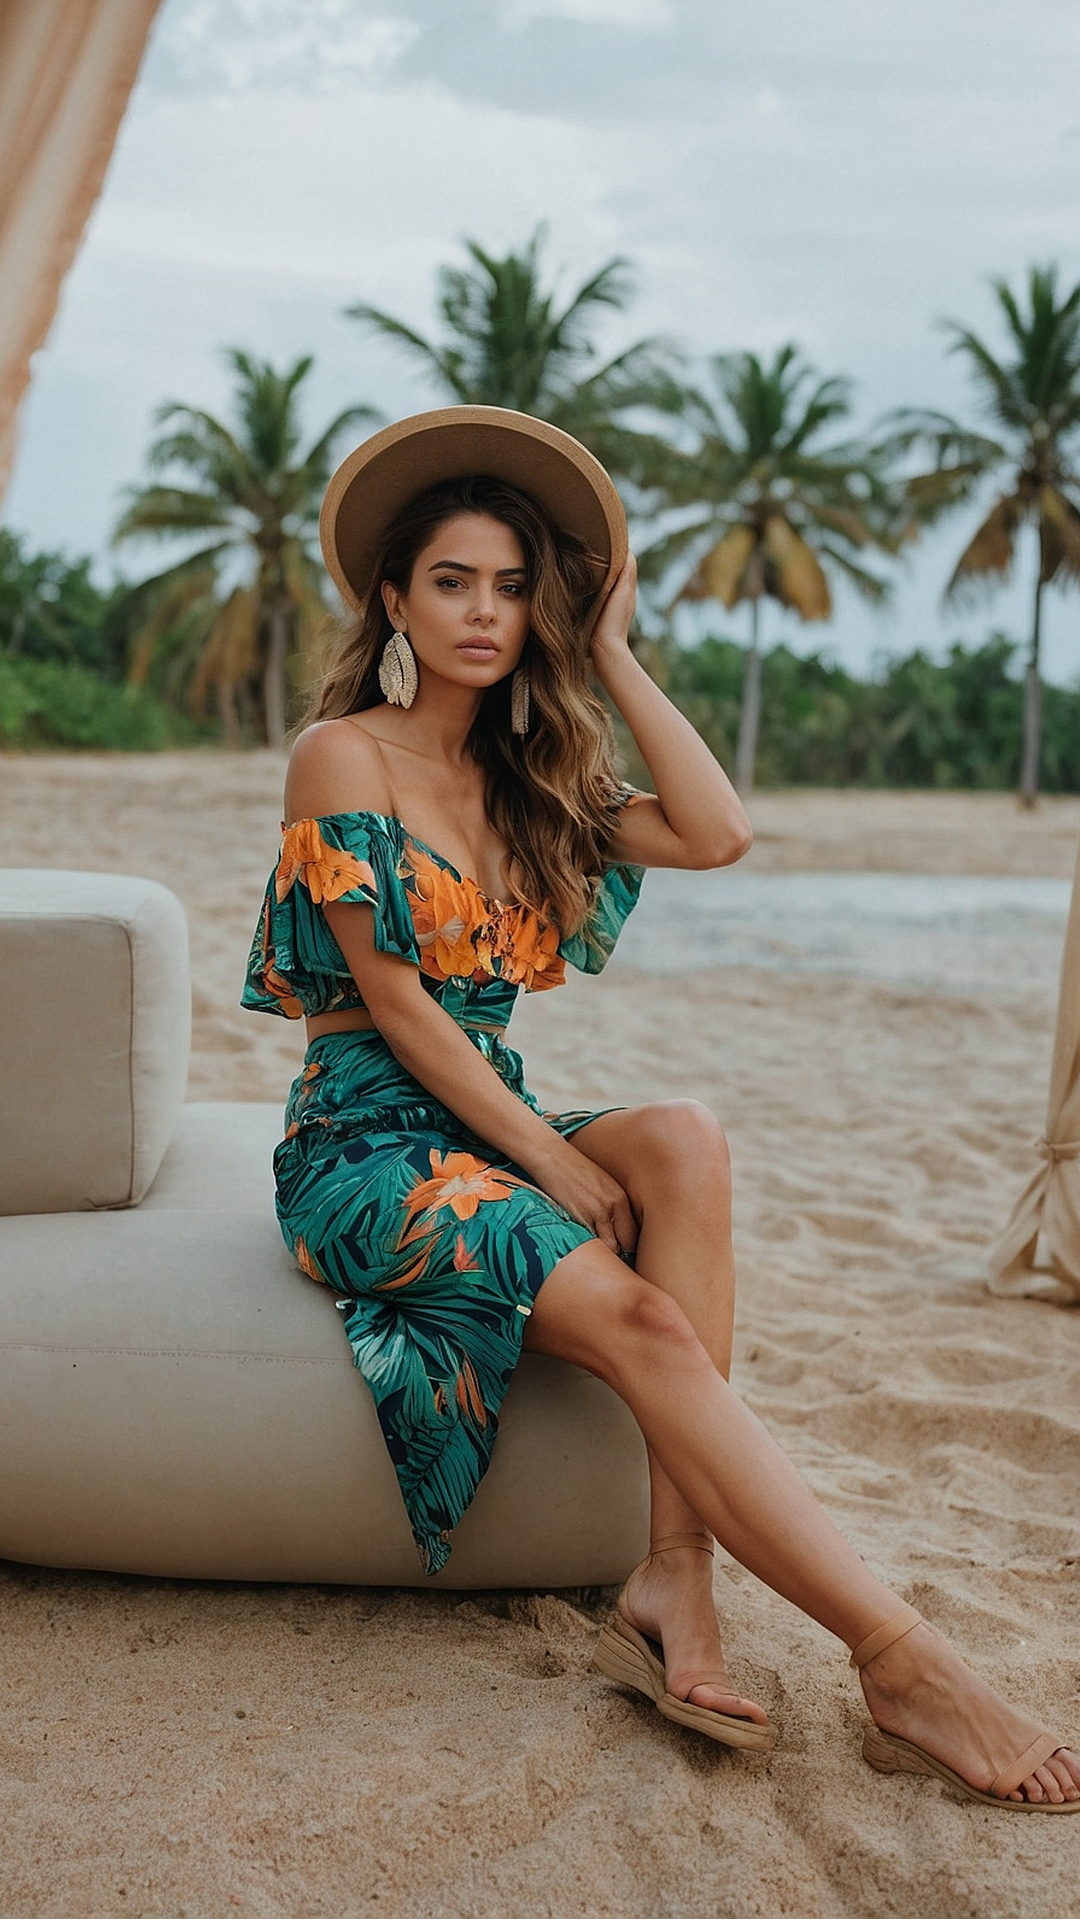 Tropical Vibes: Chic Summer Casual Looks for Women